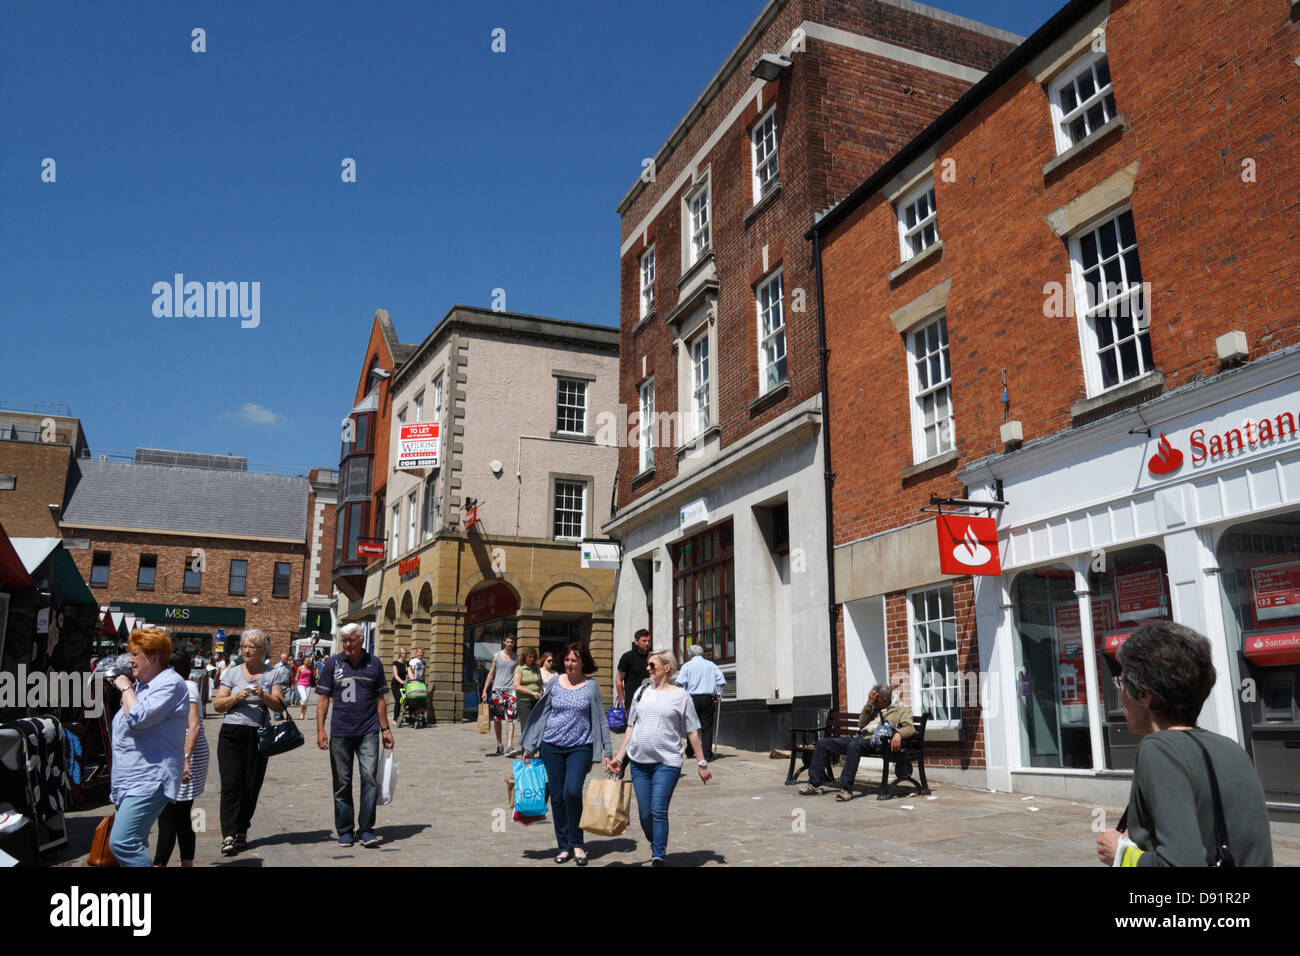 Chesterfield Market place sunny day, People Shopping, in Derbyshire England UK, English market town Stock Photo